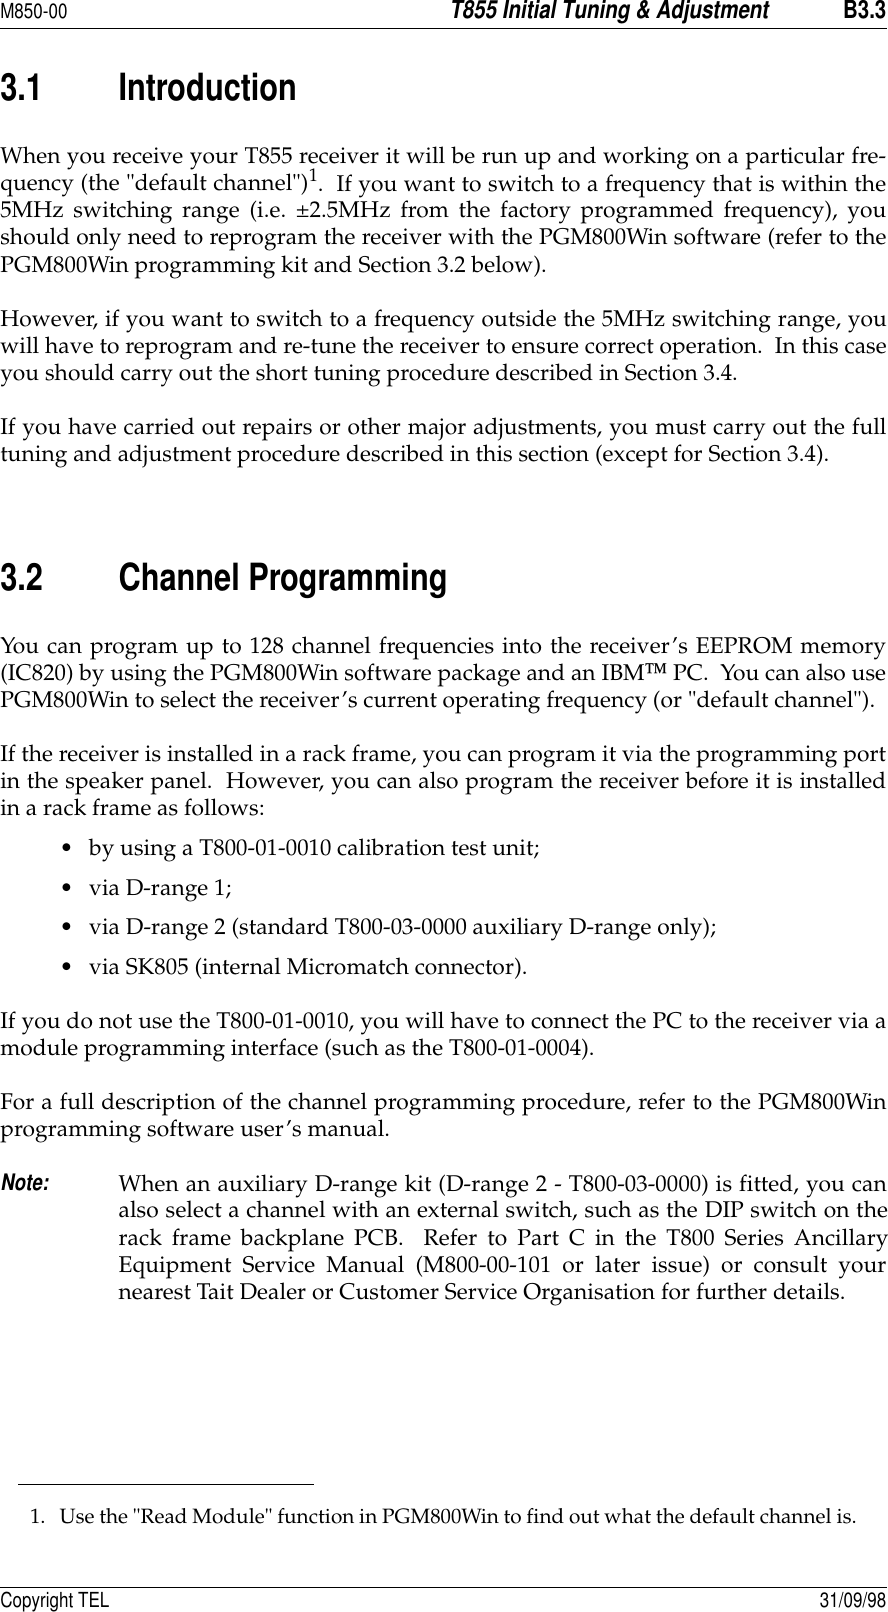 M850-00T855 Initial Tuning &amp; AdjustmentB3.3Copyright TEL 31/09/983.1 IntroductionWhen you receive your T855 receiver it will be run up and working on a particular fre-quency (the &quot;default channel&quot;)1.  If you want to switch to a frequency that is within the5MHz switching range (i.e. ±2.5MHz from the factory programmed frequency), youshould only need to reprogram the receiver with the PGM800Win software (refer to thePGM800Win programming kit and Section 3.2 below).  However, if you want to switch to a frequency outside the 5MHz switching range, youwill have to reprogram and re-tune the receiver to ensure correct operation.  In this caseyou should carry out the short tuning procedure described in Section 3.4.If you have carried out repairs or other major adjustments, you must carry out the fulltuning and adjustment procedure described in this section (except for Section 3.4).  3.2 Channel ProgrammingYou can program up to 128 channel frequencies into the receiver’s EEPROM memory(IC820) by using the PGM800Win software package and an IBM PC.  You can also usePGM800Win to select the receiver’s current operating frequency (or &quot;default channel&quot;).If the receiver is installed in a rack frame, you can program it via the programming portin the speaker panel.  However, you can also program the receiver before it is installedin a rack frame as follows:• by using a T800-01-0010 calibration test unit;• via D-range 1;• via D-range 2 (standard T800-03-0000 auxiliary D-range only);• via SK805 (internal Micromatch connector).If you do not use the T800-01-0010, you will have to connect the PC to the receiver via amodule programming interface (such as the T800-01-0004).For a full description of the channel programming procedure, refer to the PGM800Winprogramming software user’s manual.Note:When an auxiliary D-range kit (D-range 2 - T800-03-0000) is fitted, you canalso select a channel with an external switch, such as the DIP switch on therack frame backplane PCB.  Refer to Part C in the T800 Series AncillaryEquipment Service Manual (M800-00-101 or later issue) or consult yournearest Tait Dealer or Customer Service Organisation for further details.1. Use the &quot;Read Module&quot; function in PGM800Win to find out what the default channel is.